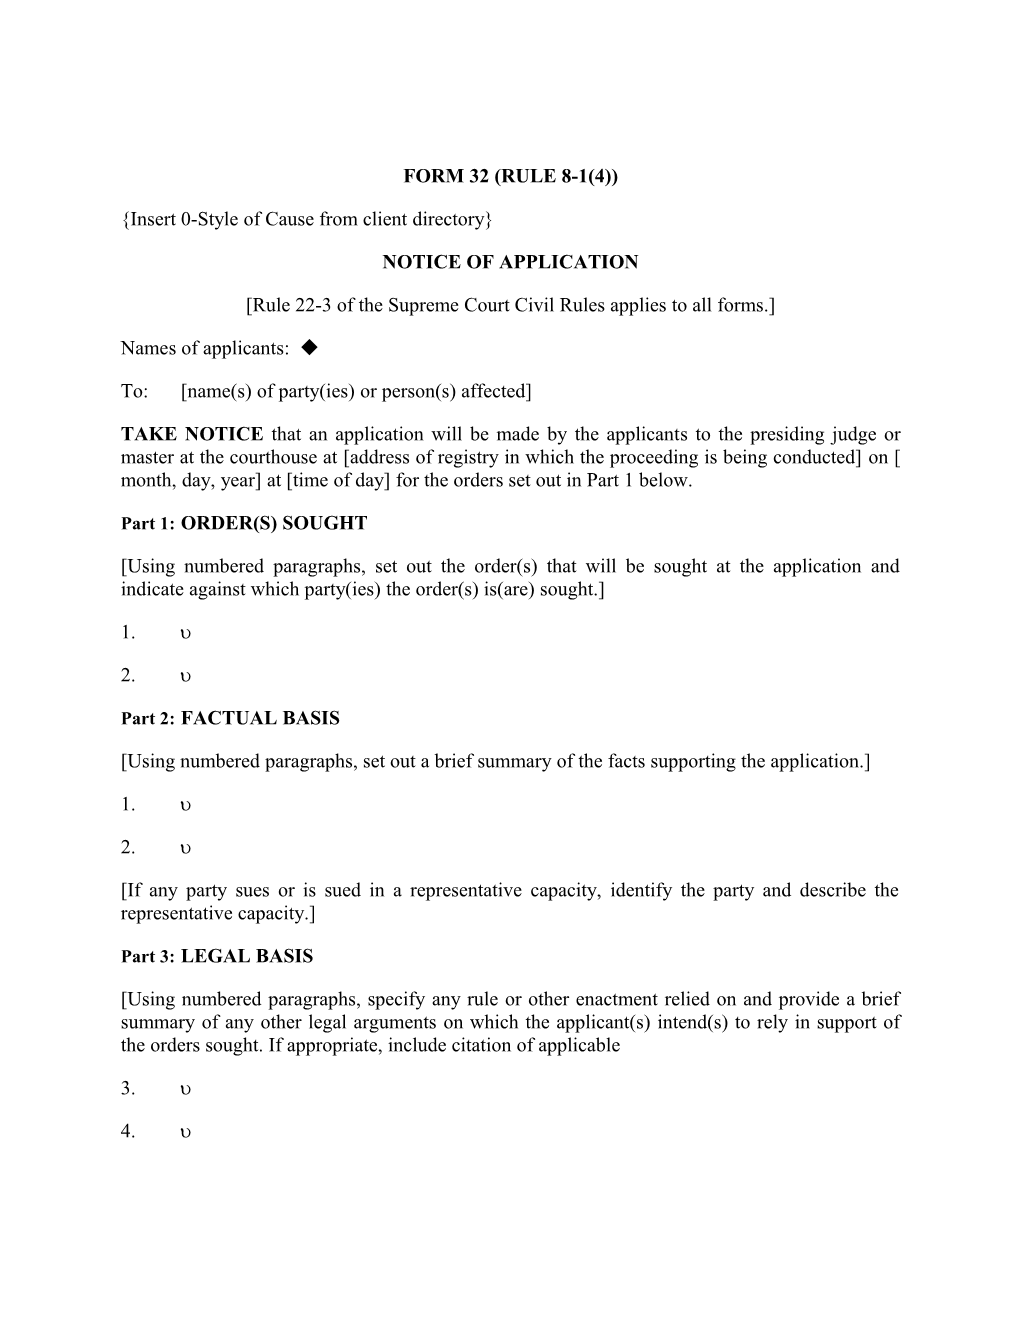 Form 32 - Notice of Application